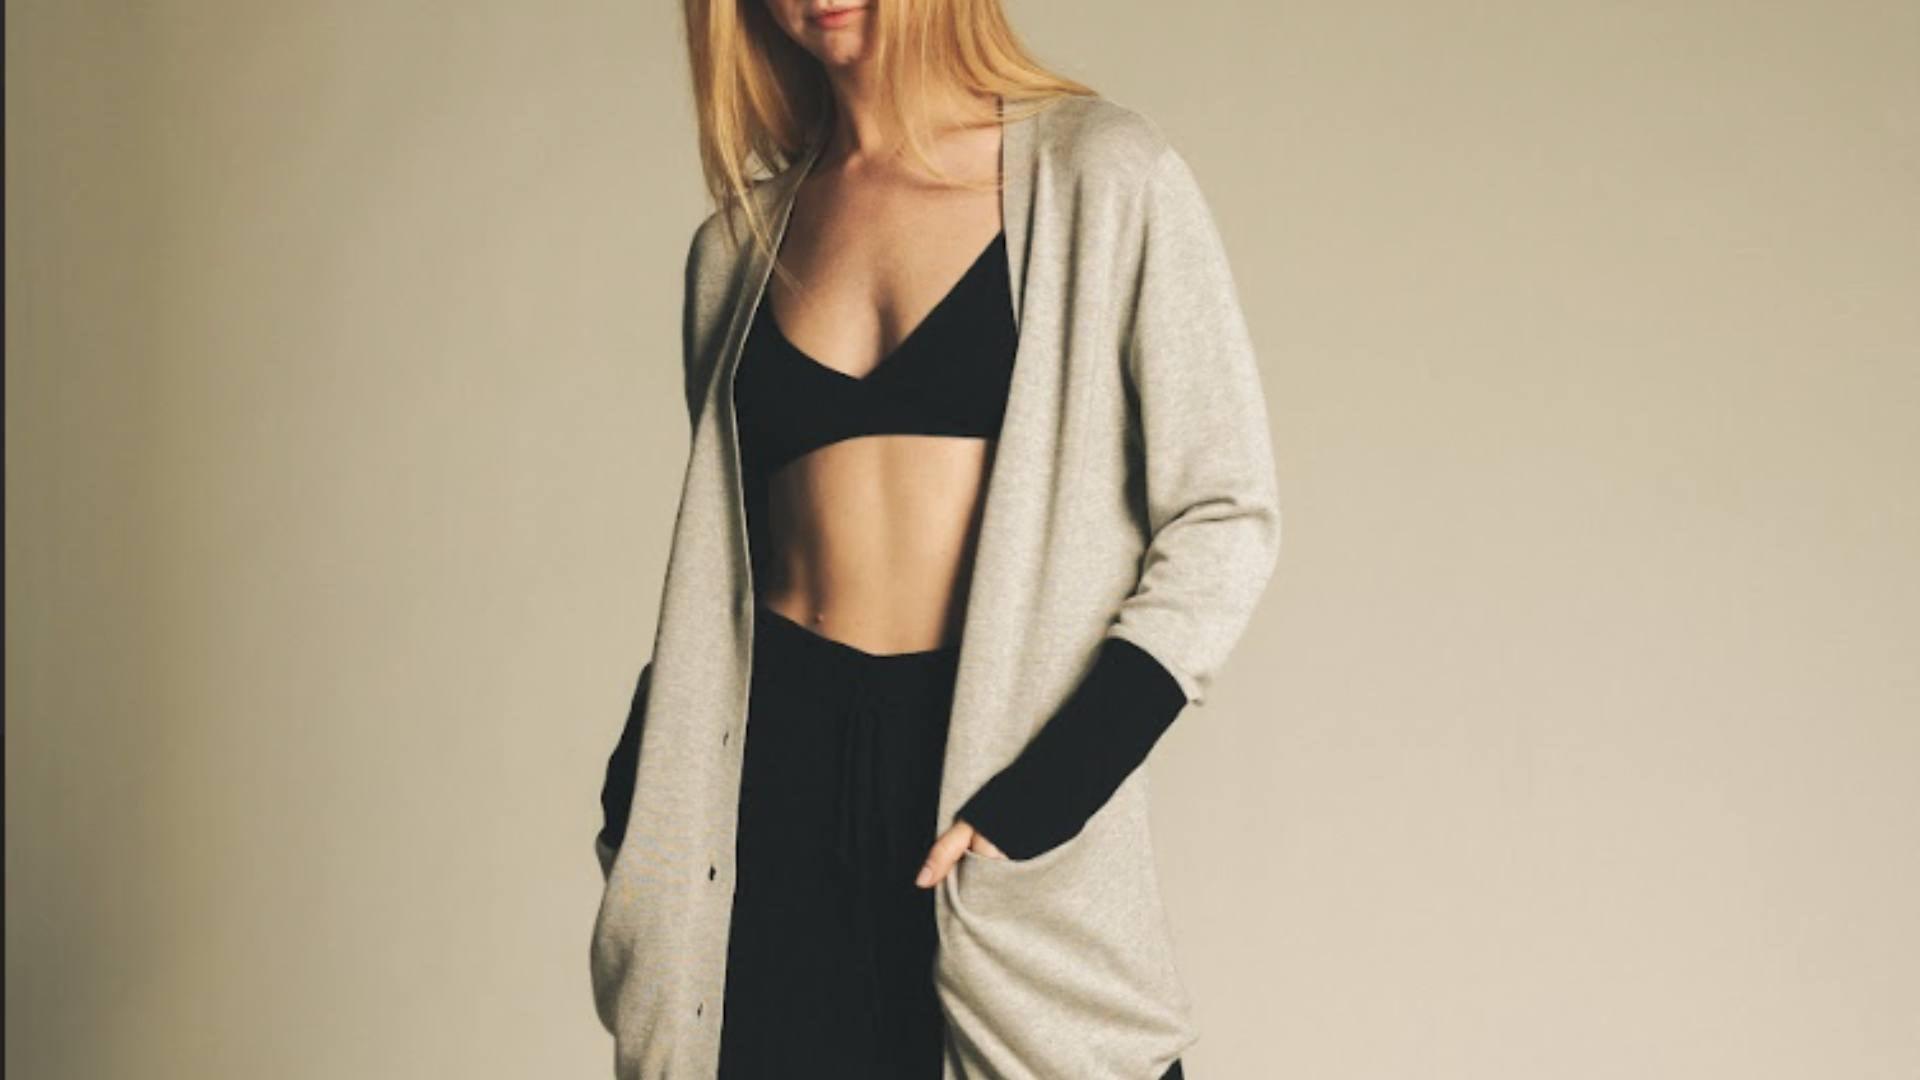 A blonde woman wears a cozy gray sweater with black sweatpants and a black bra, demonstrating luxe loungewear.